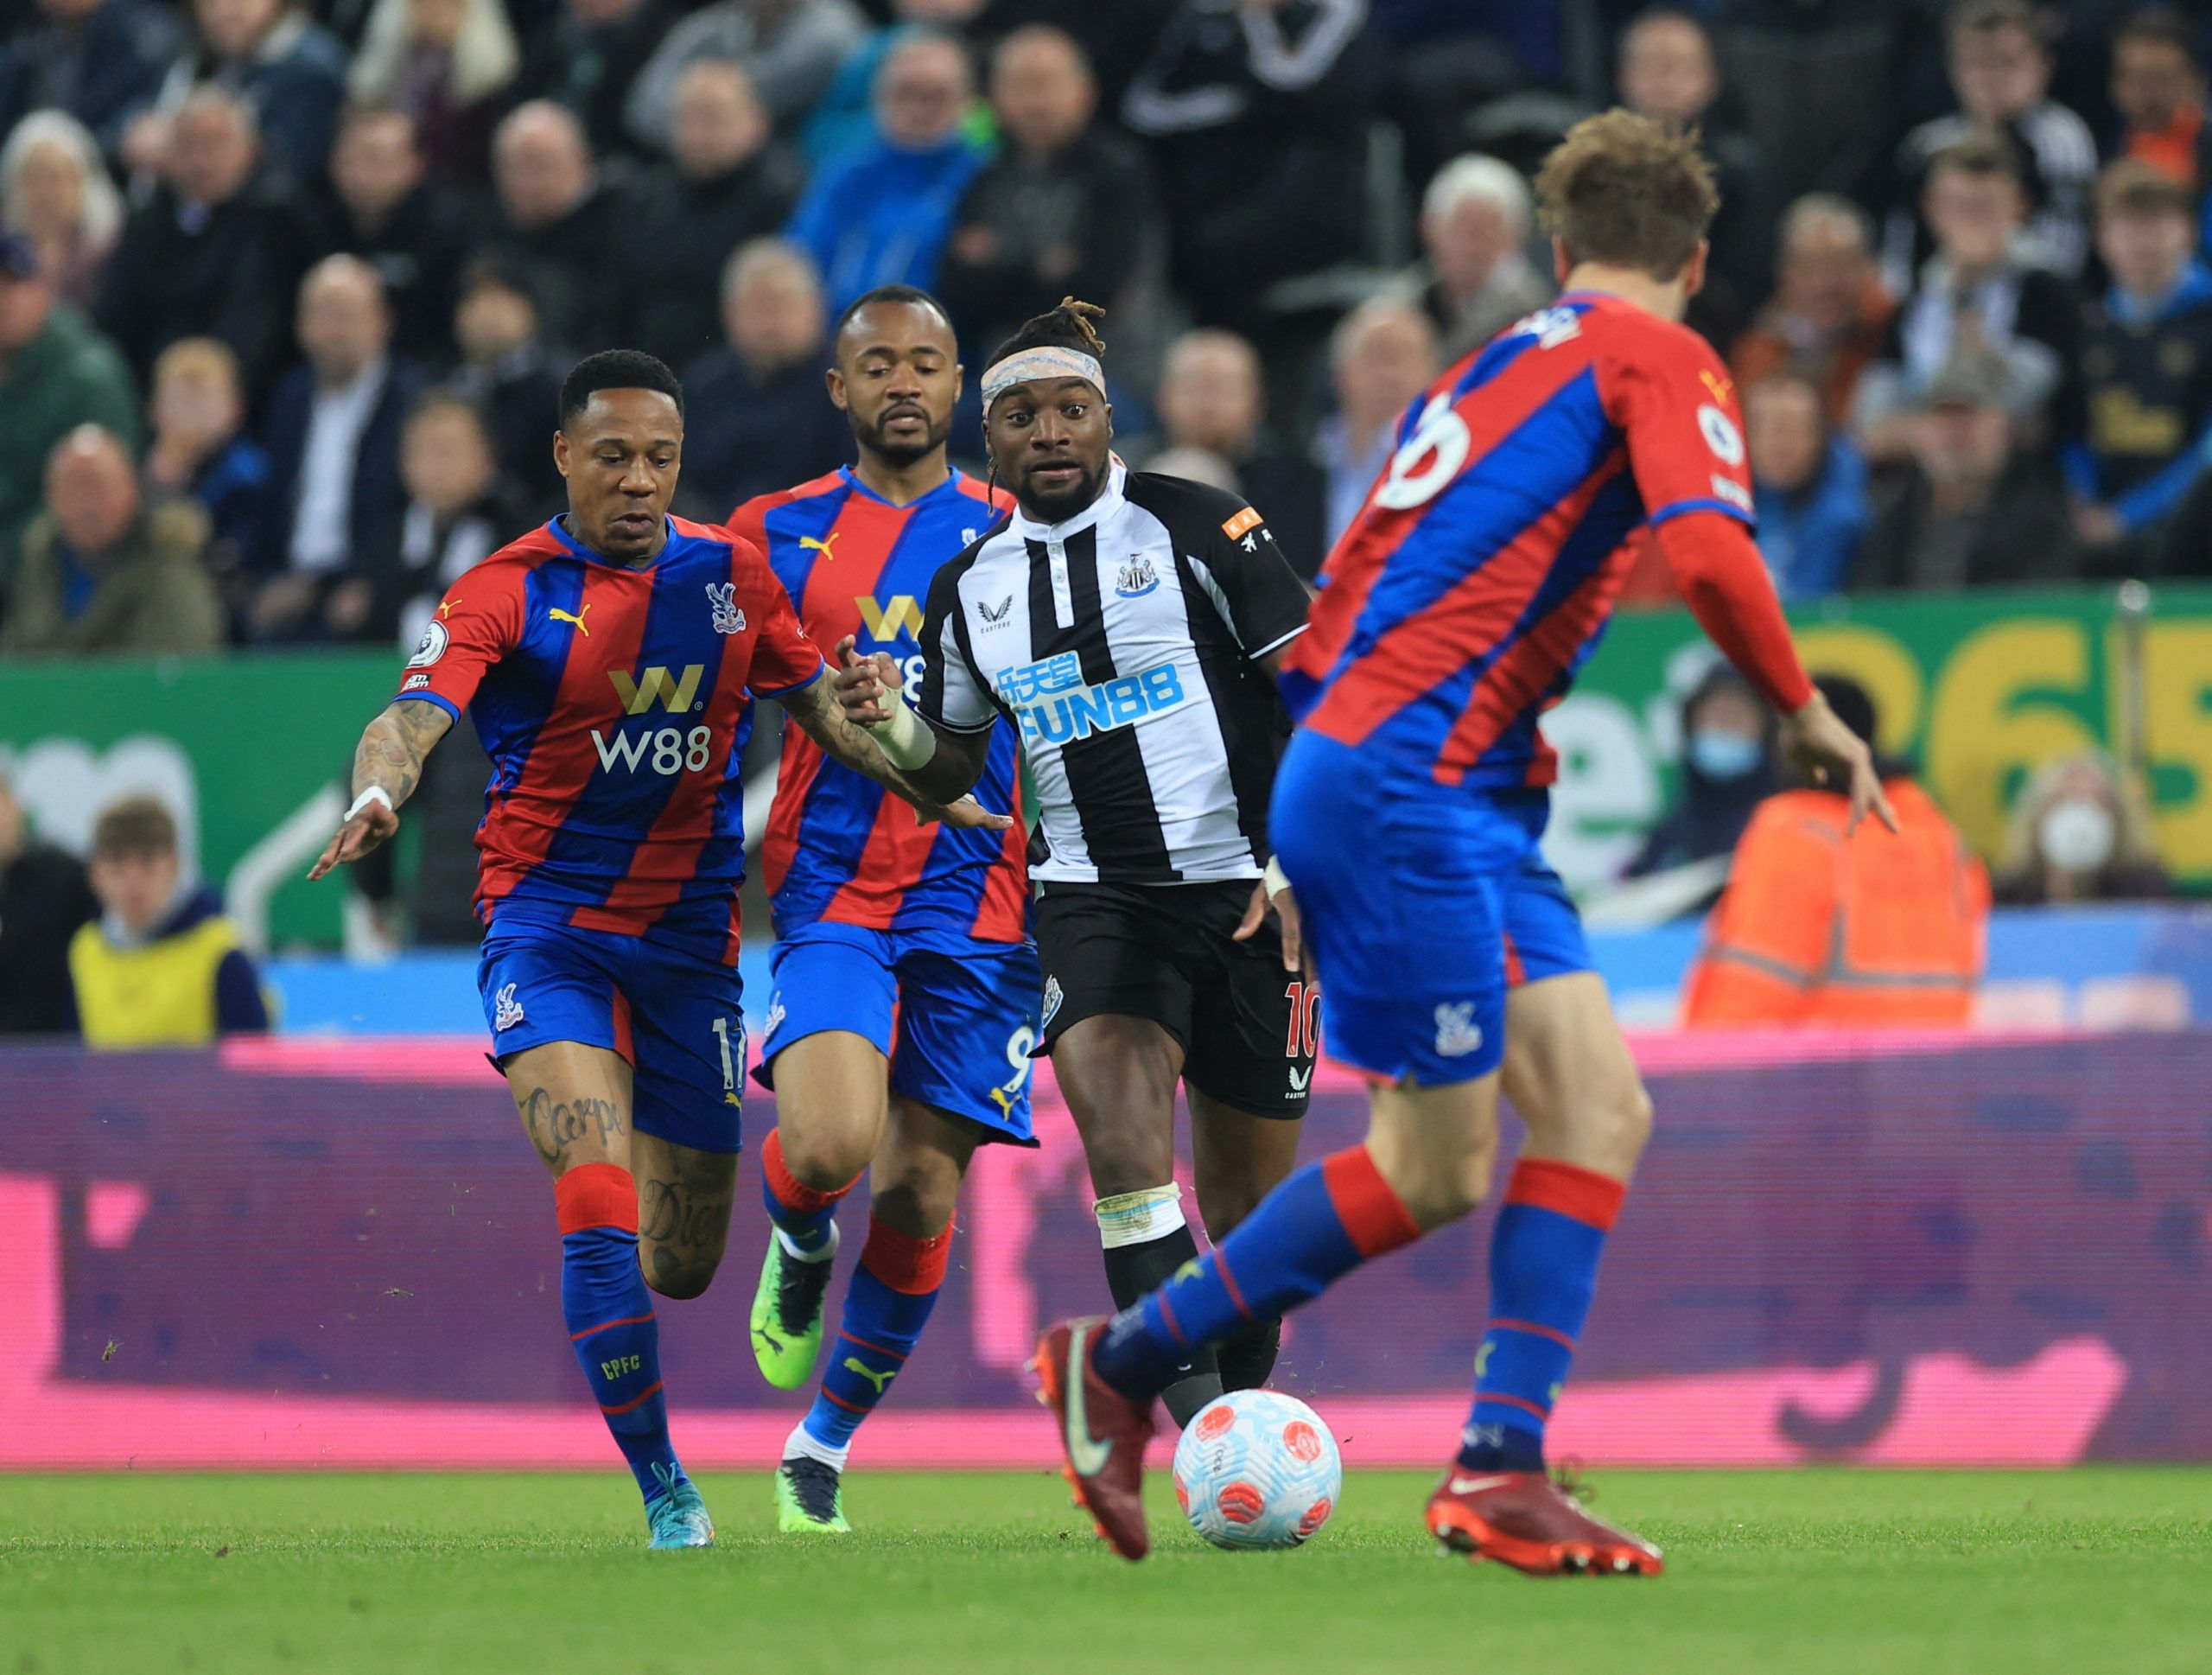 Soccer Football - Premier League - Newcastle United v Crystal Palace - St James' Park, Newcastle, Britain - April 20, 2022 Newcastle United's Allan Saint-Maximin in action with Crystal Palace's Jordan Ayew and Nathaniel Clyne Action Images via Reuters/Lee Smith EDITORIAL USE ONLY. No use with unauthorized audio, video, data, fixture lists, club/league logos or 'live' services. Online in-match use limited to 75 images, no video emulation. No use in betting, games or single club /league/player pub